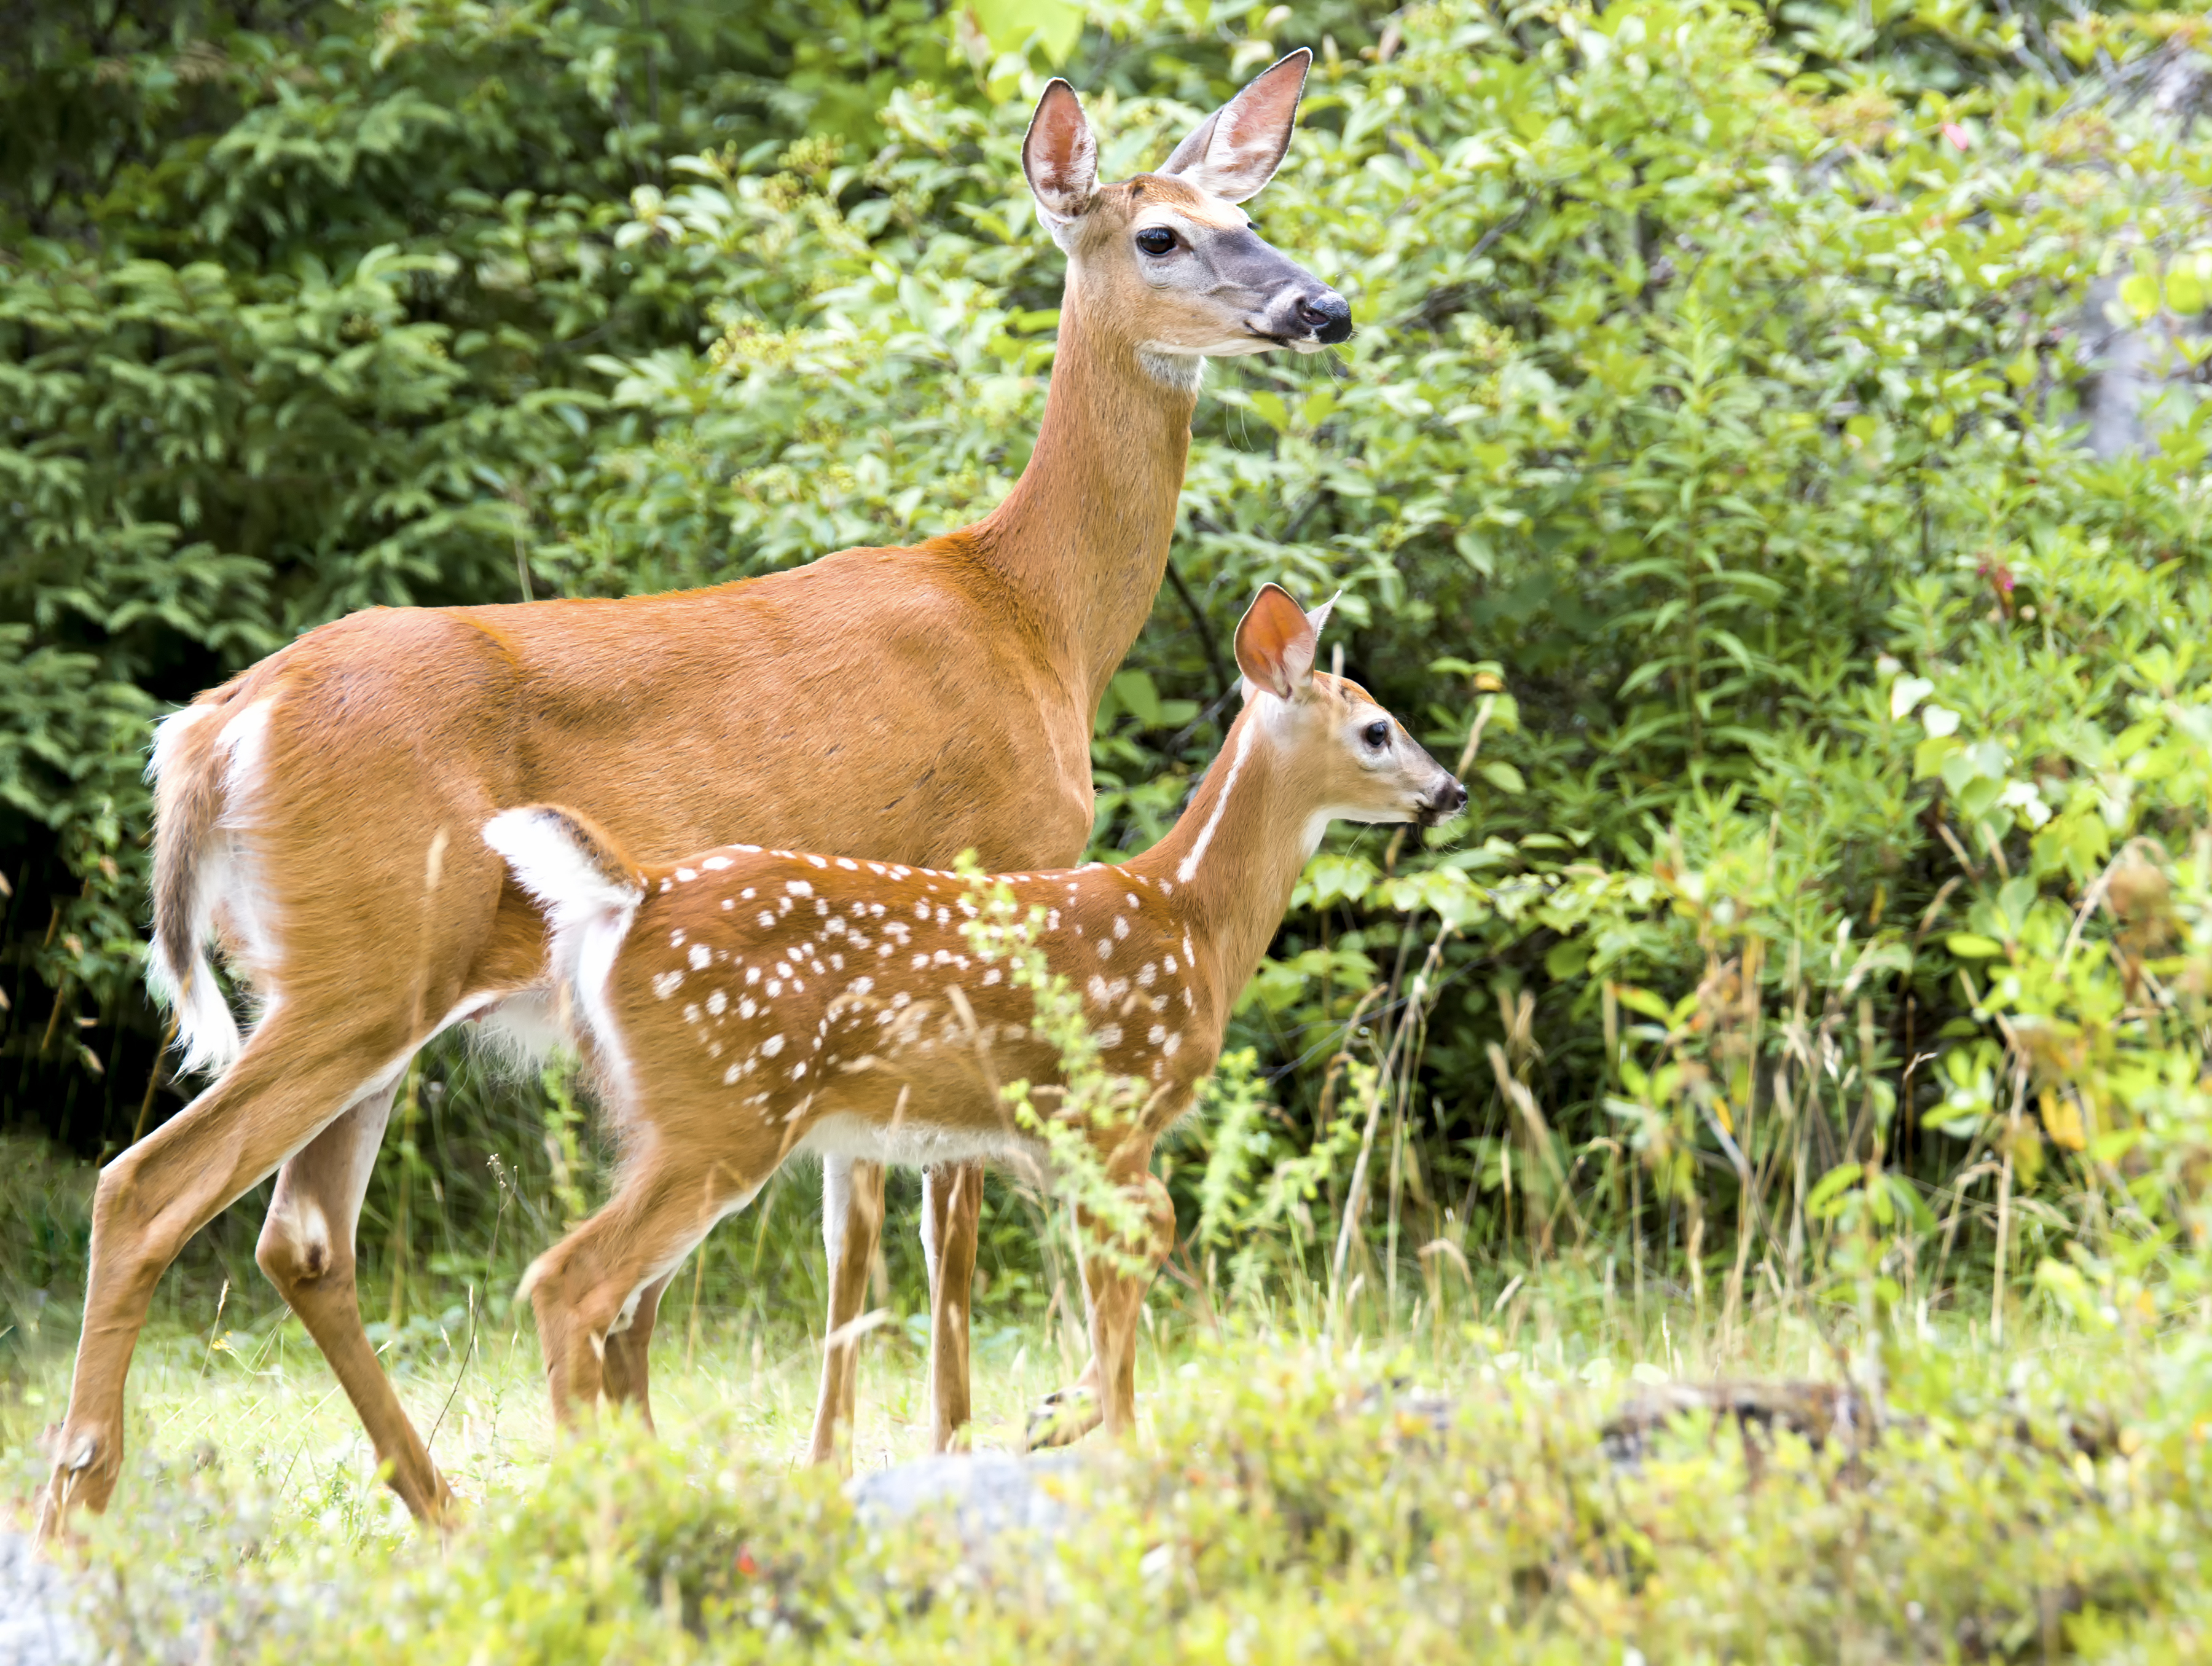 White tail deer - say hello to your wild neighbours!